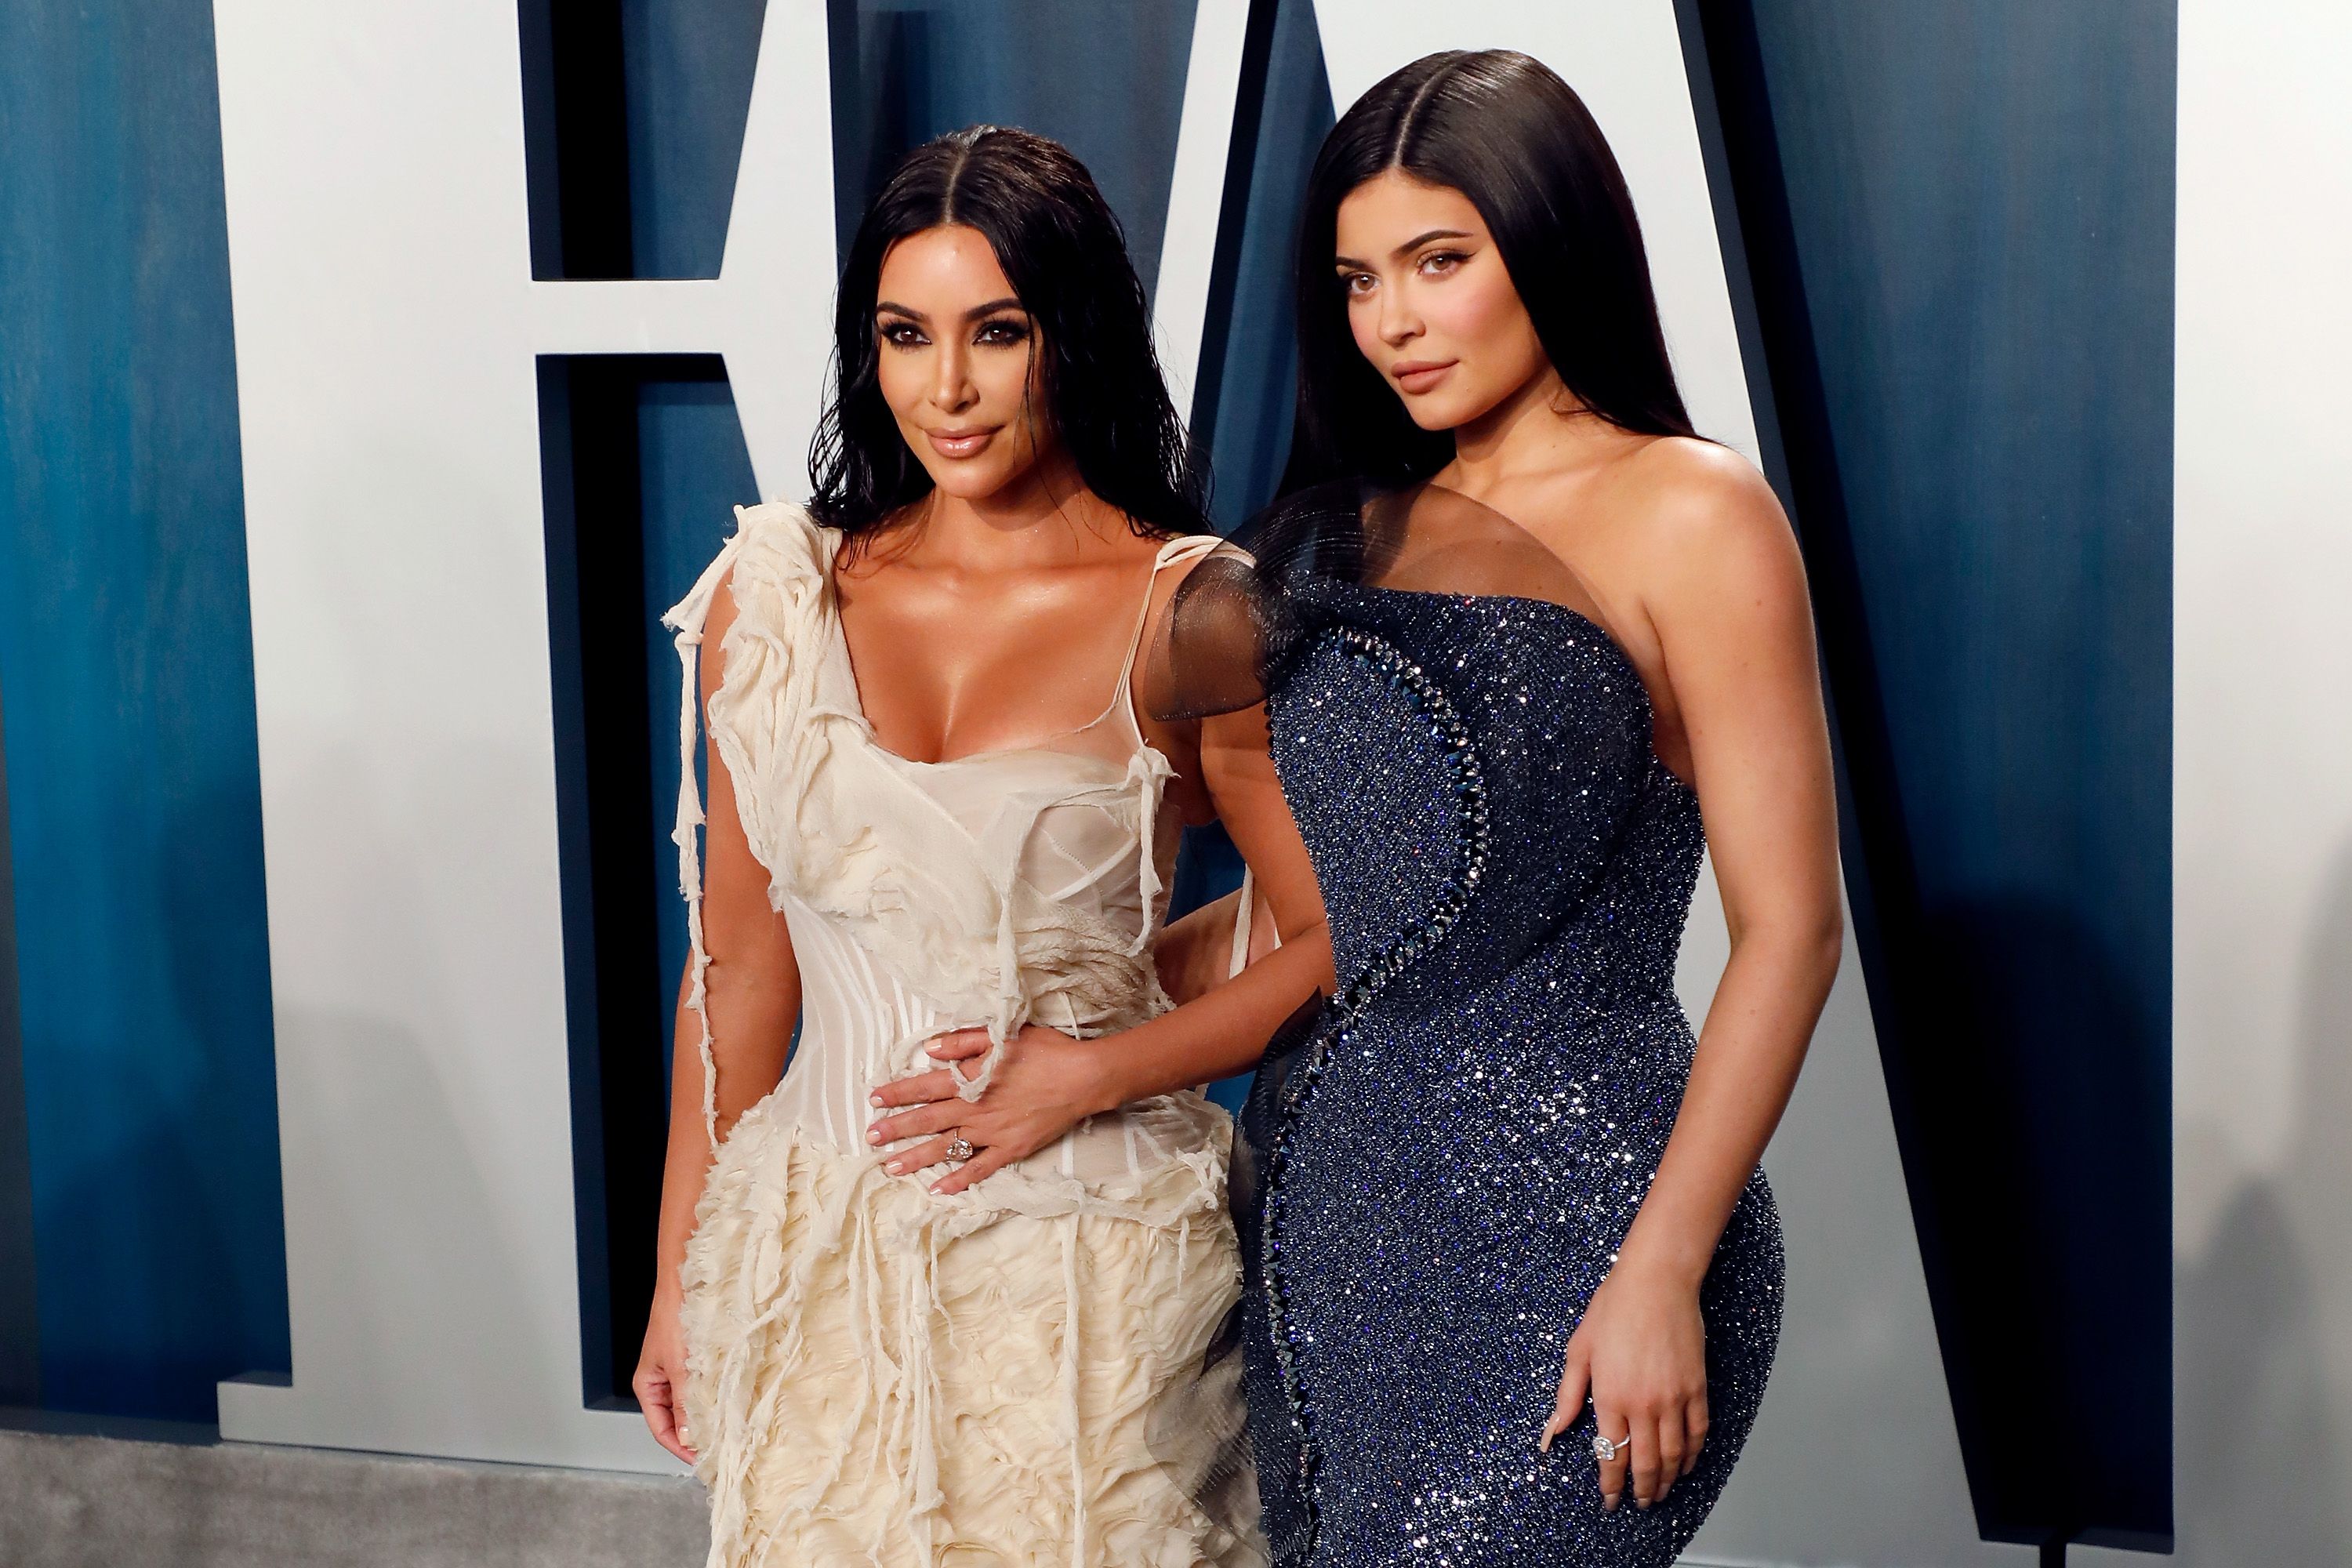 The one hair product both Kylie Jenner and Kim Kardashian use